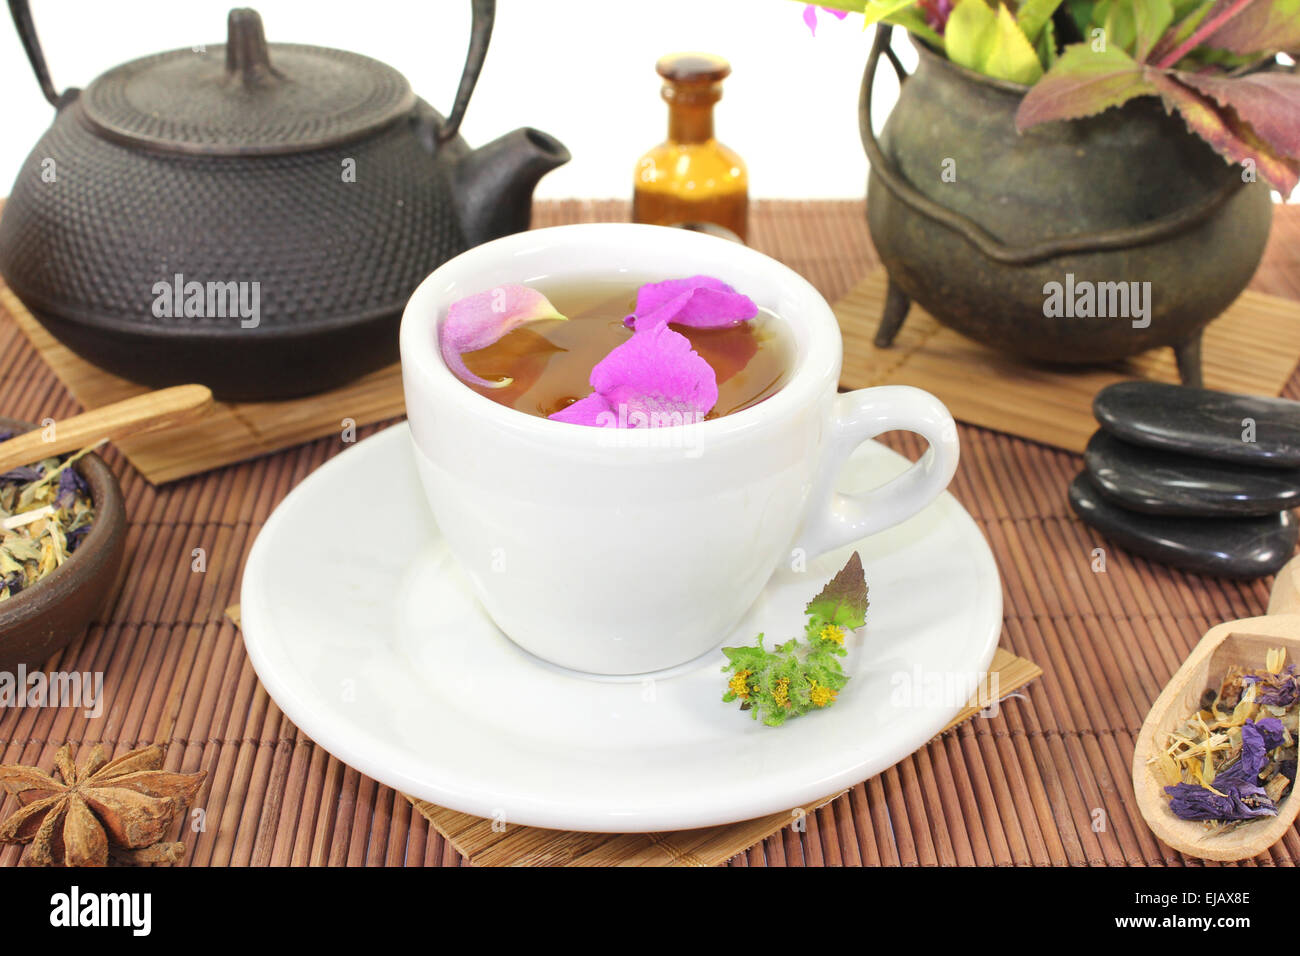 Chinese natural medicine with a cup of tea Stock Photo